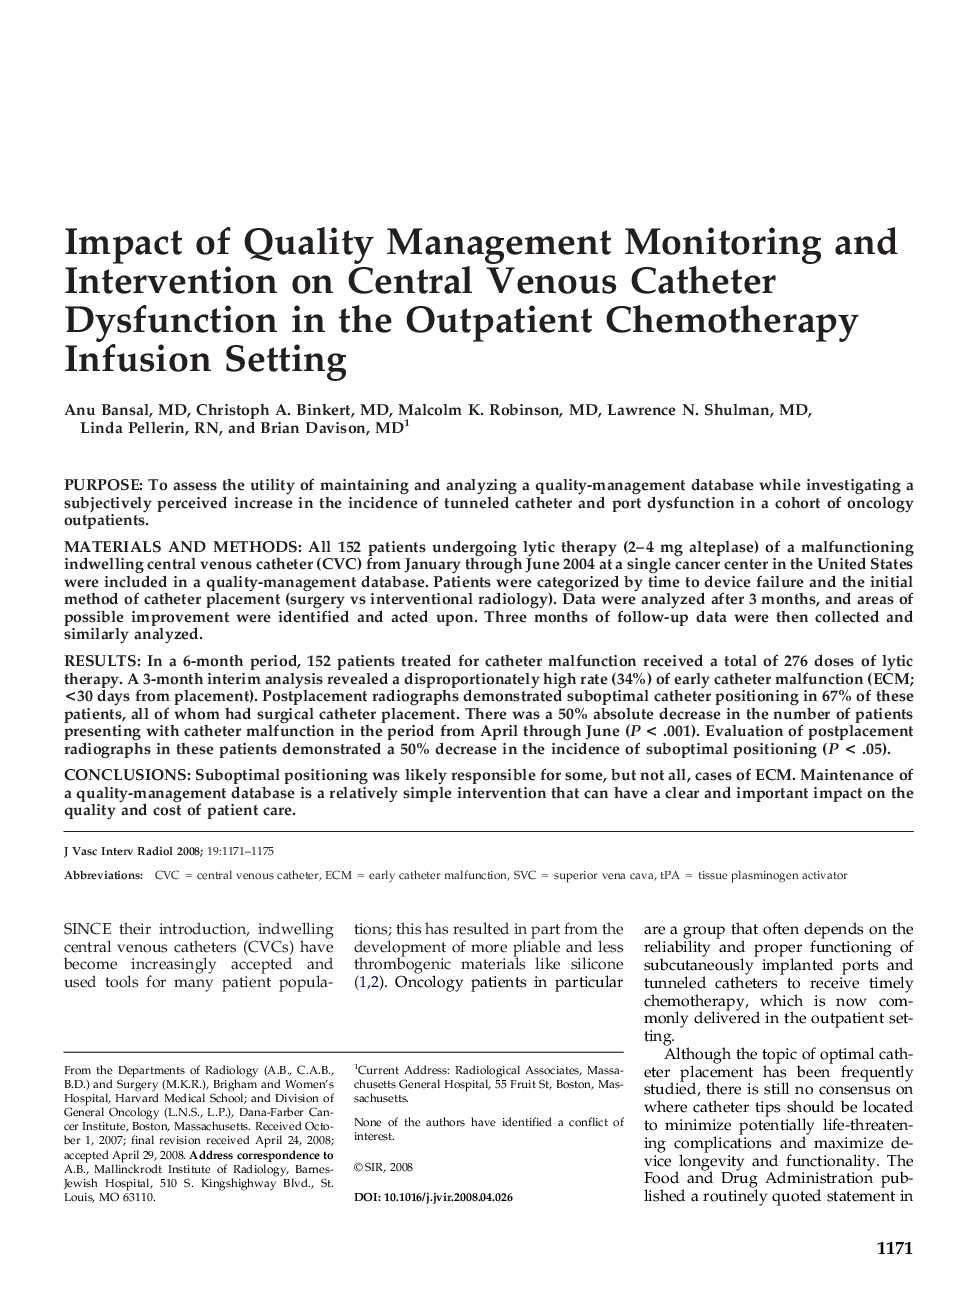 Impact of Quality Management Monitoring and Intervention on Central Venous Catheter Dysfunction in the Outpatient Chemotherapy Infusion Setting